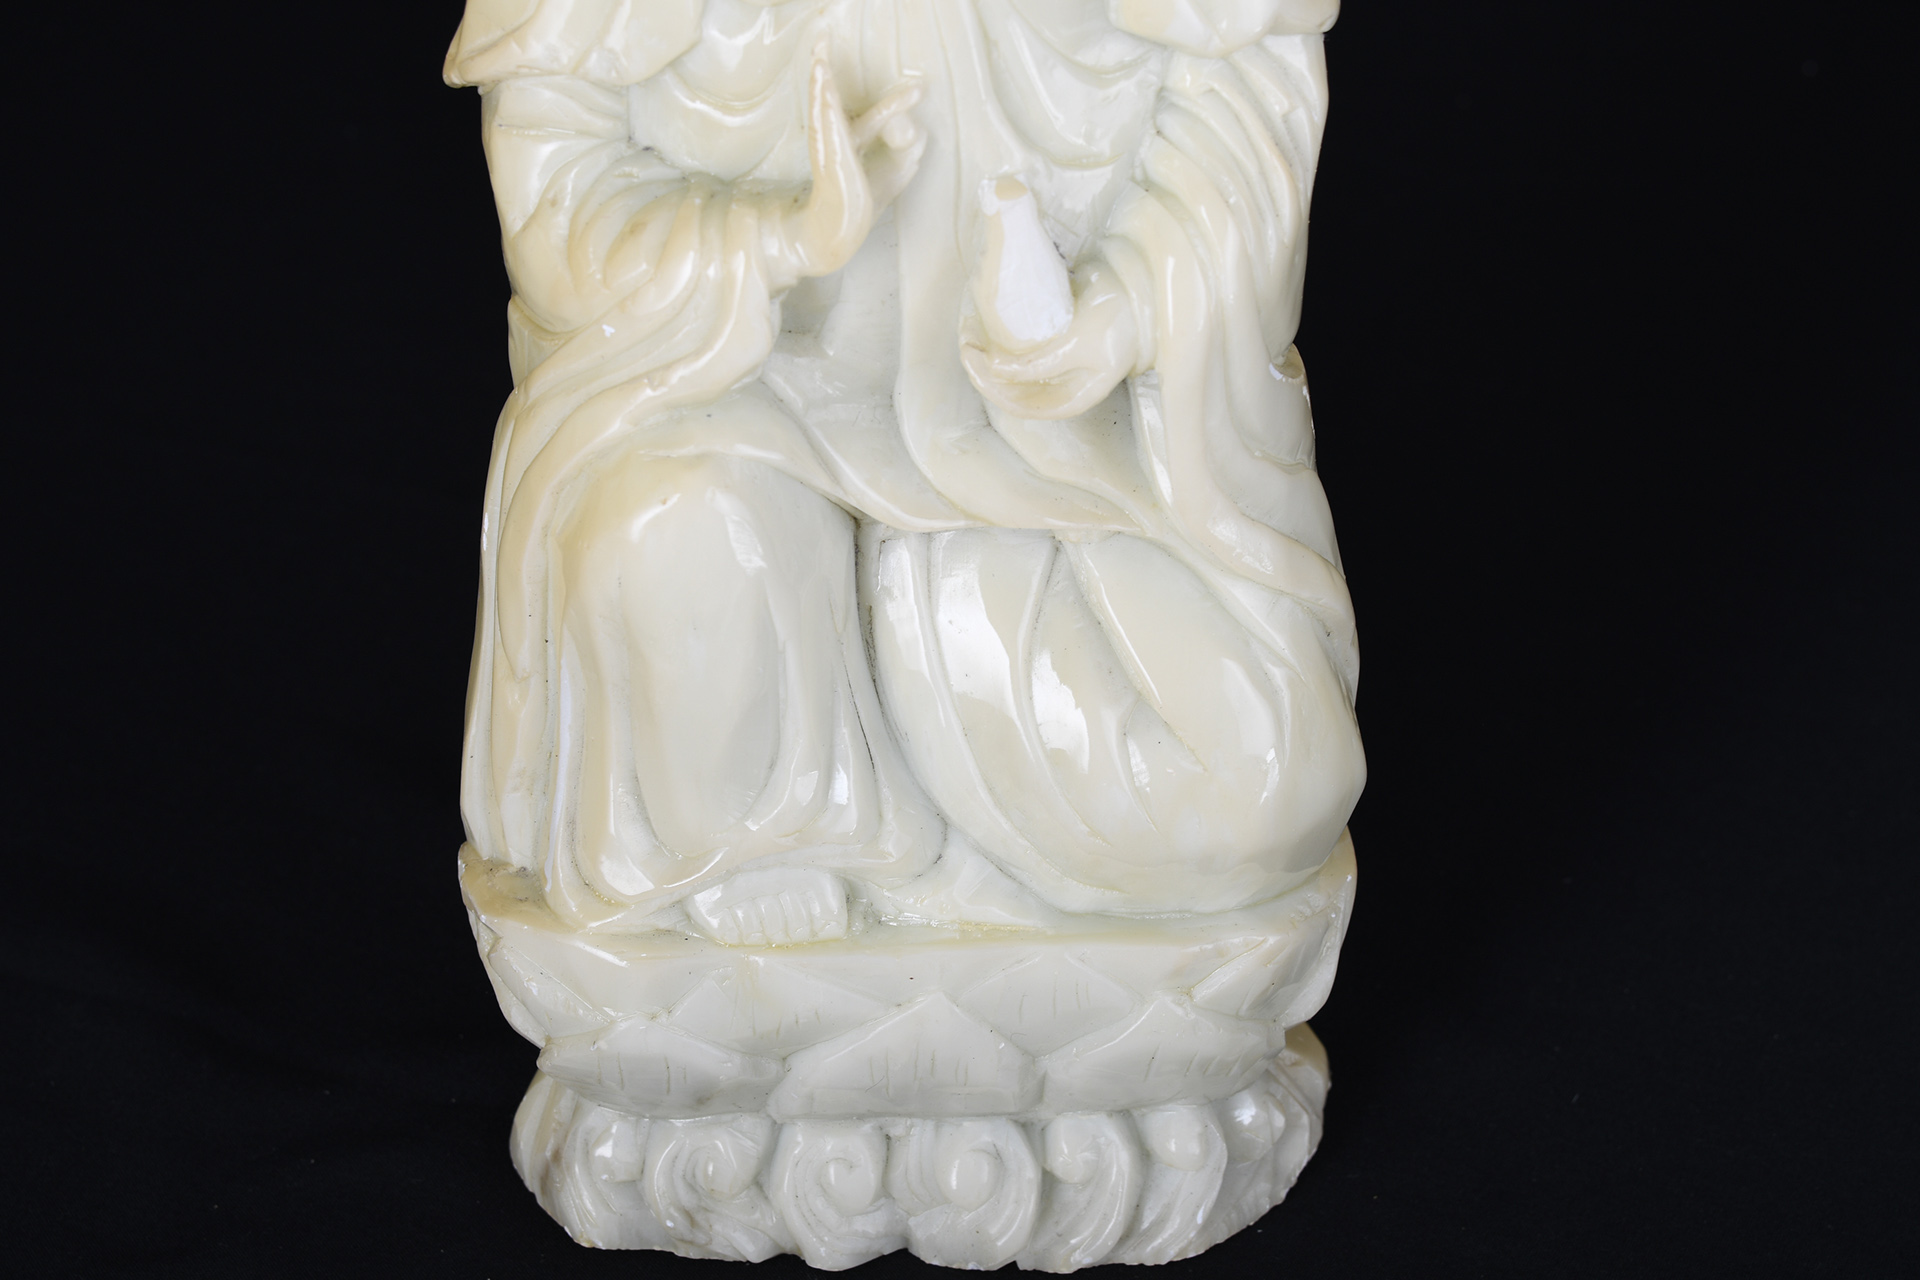 "Guan Yin" Goddess  Carving in Marble